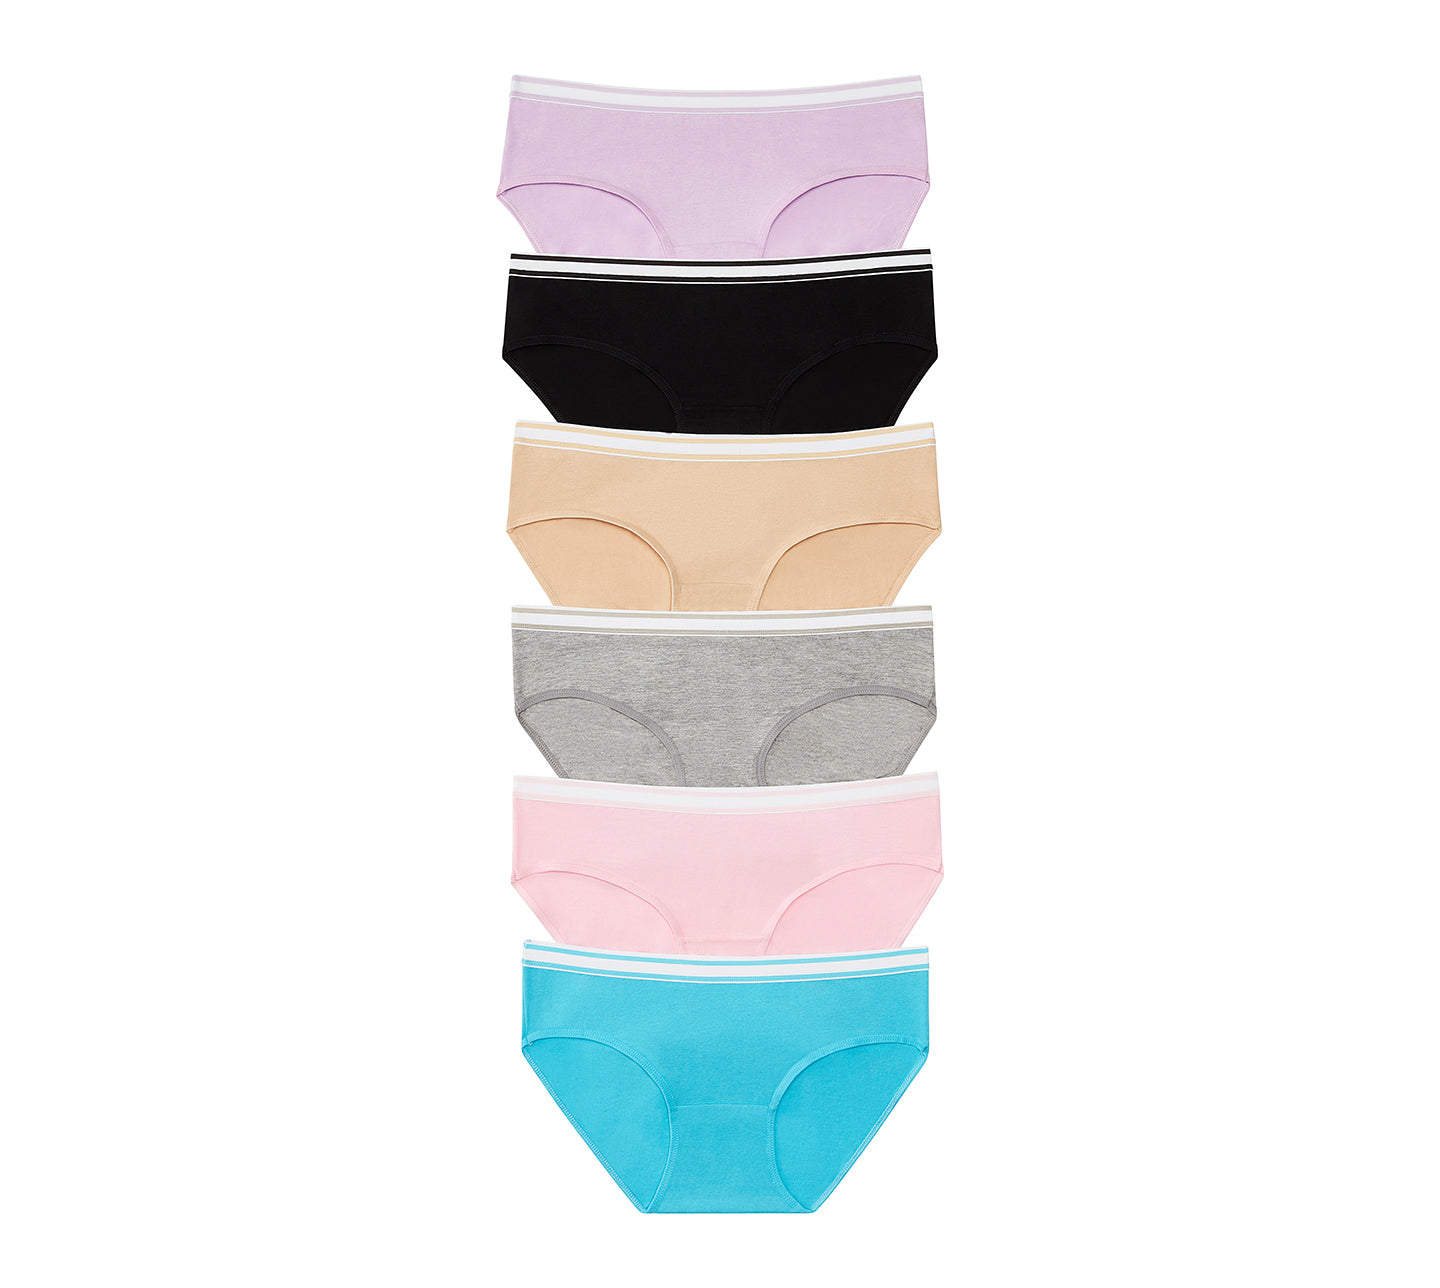 TAIPOVE 6 Packs Cotton Briefs Knickers for Women Ladies Girls Stretch  Hipster Underwear Comfy Panties Boxers Undies Nickers Gift Set :  : Fashion